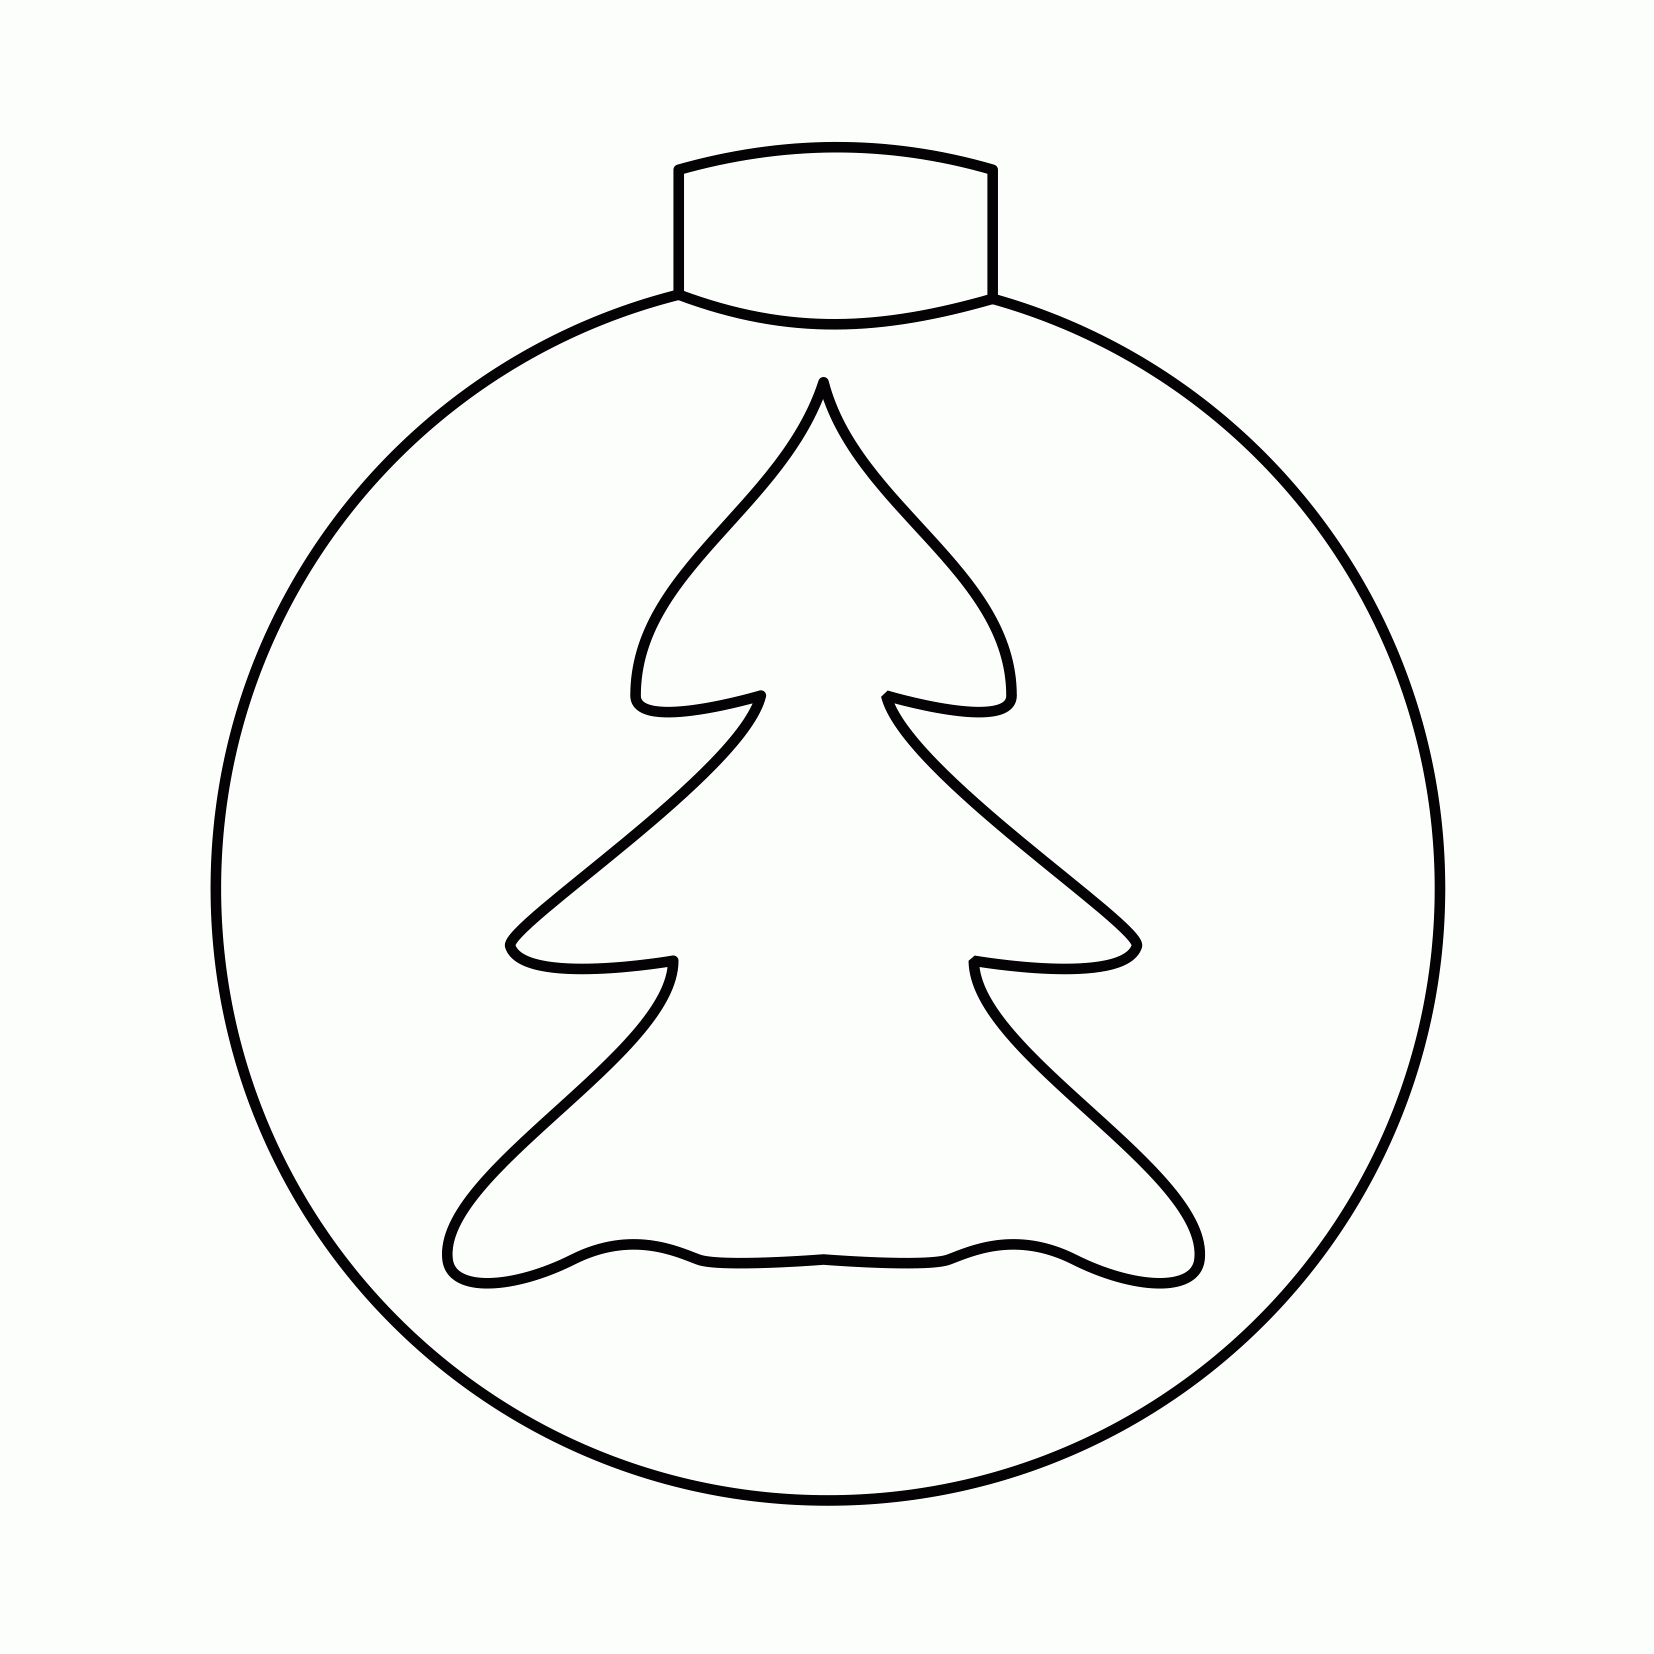 Christmas Tree Ornament Coloring Pages Coloring Ornaments 6 Ugtpls - Free Printable Christmas Tree Ornaments To Color